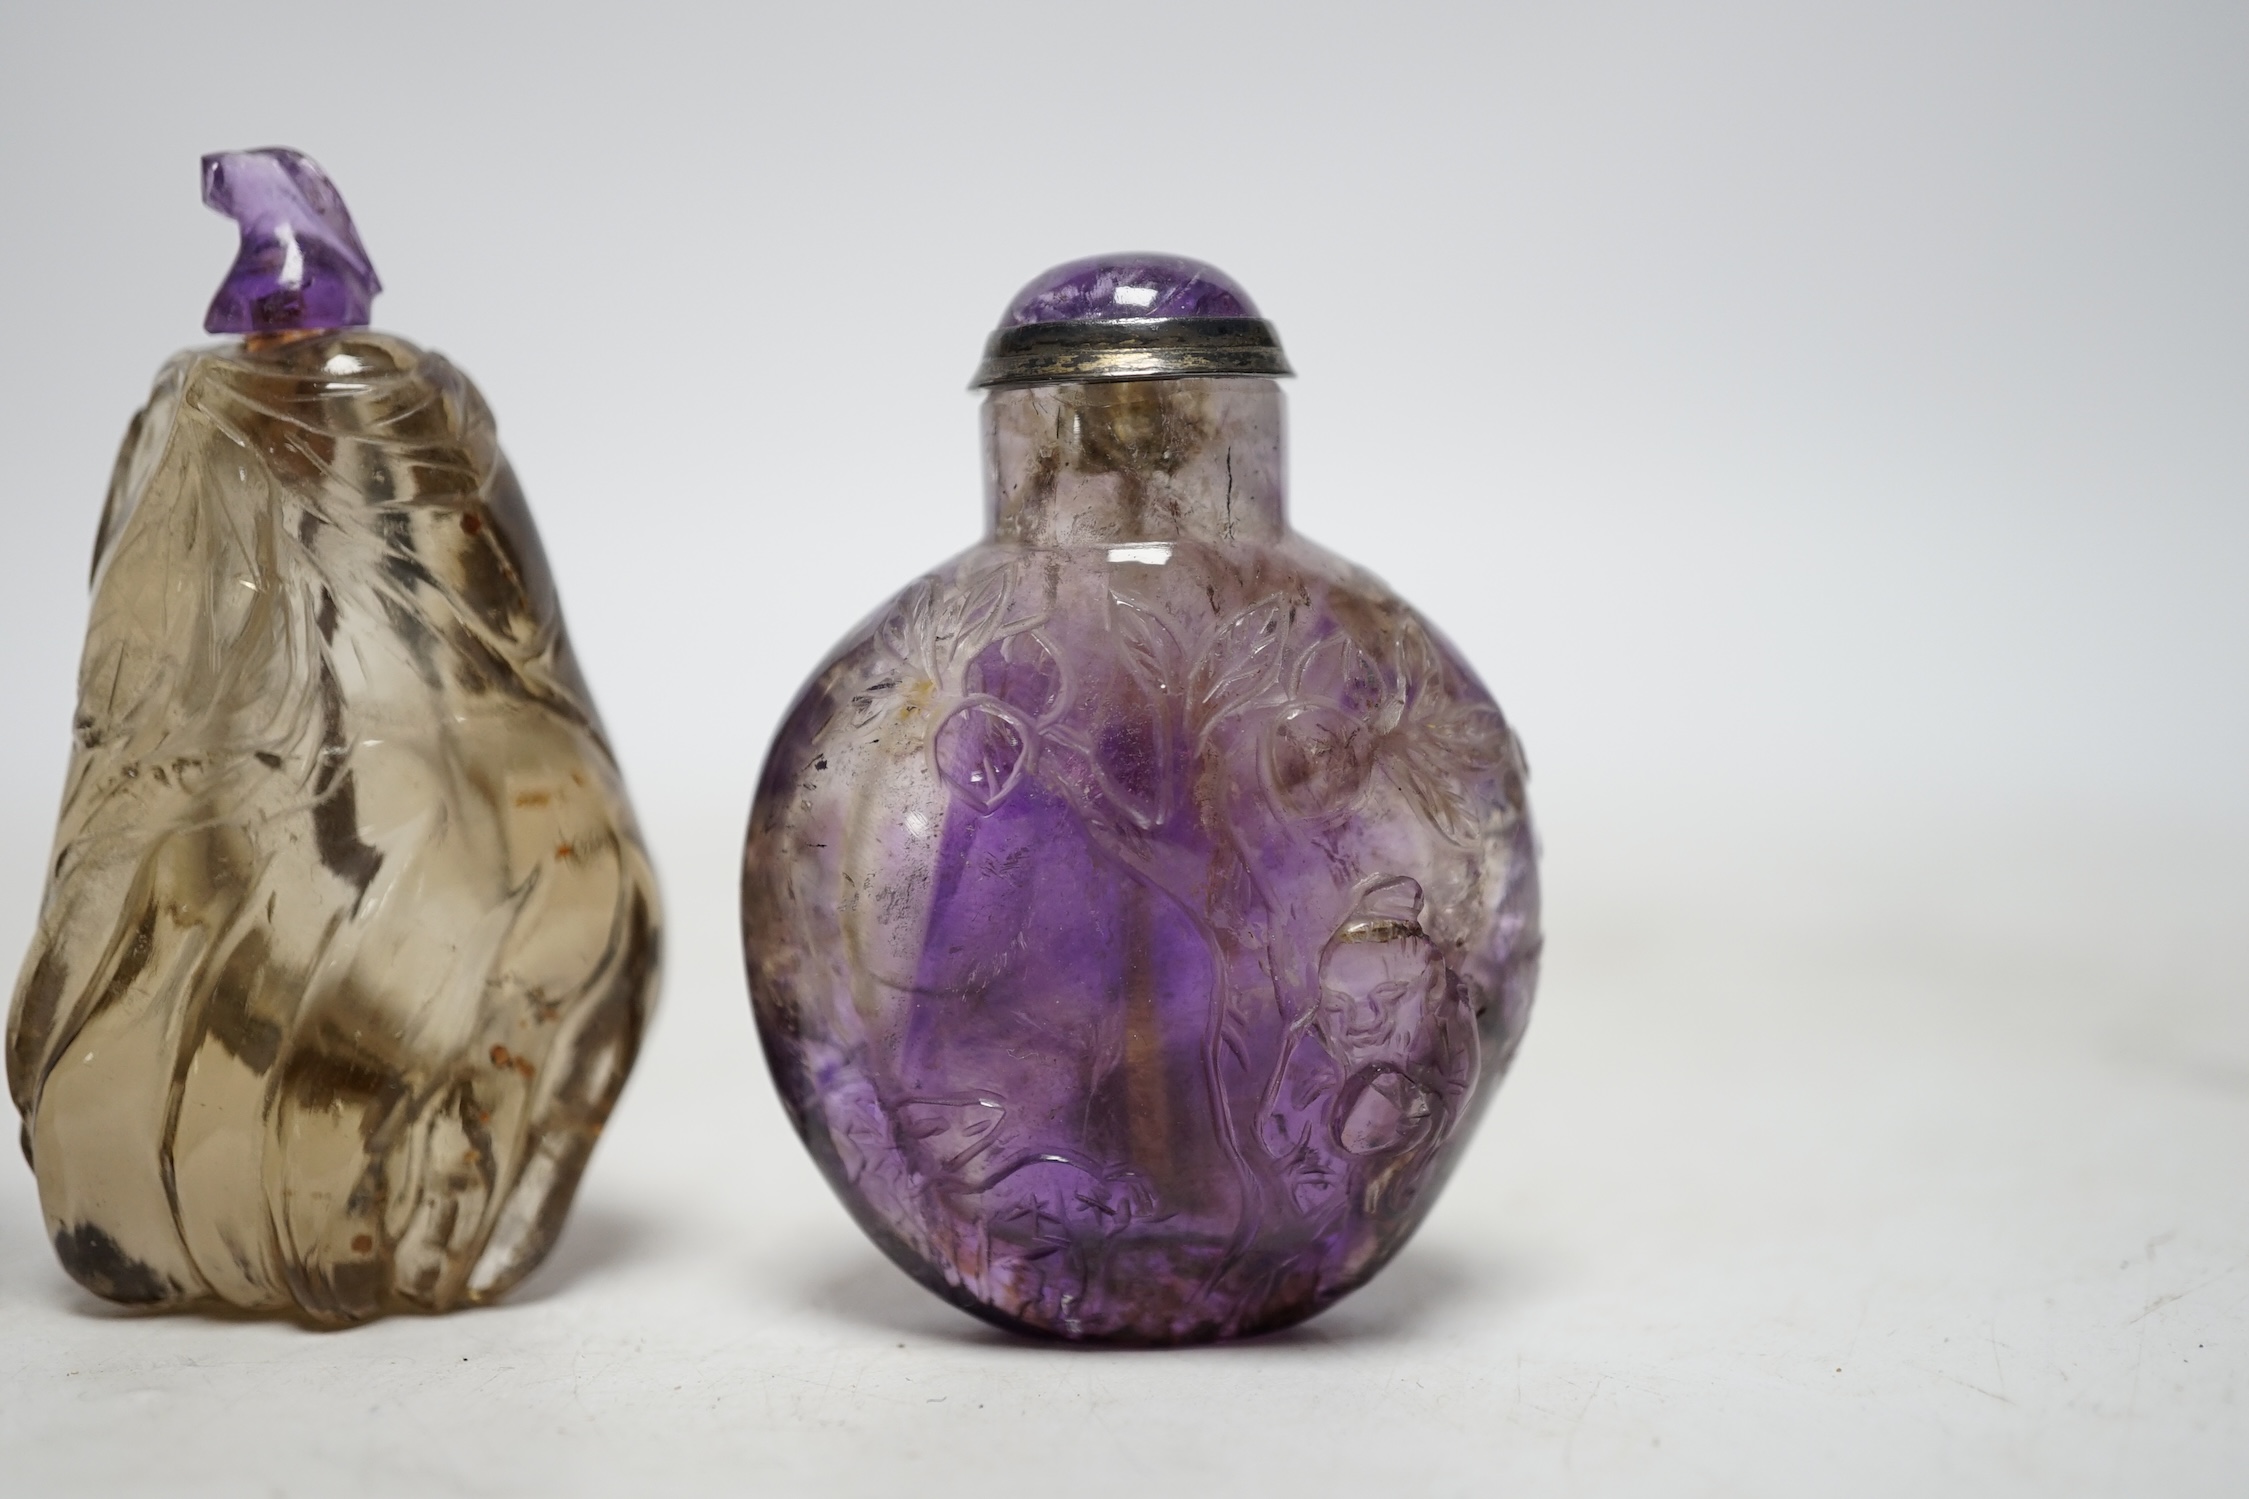 Three Chinese carved quartz snuff bottles, 19th/20th century to include a smoky quartz shuangxi bottle, an amethyst quartz bottle and a small smoky quartz gourd shaped bottle, largest 6.5cm high